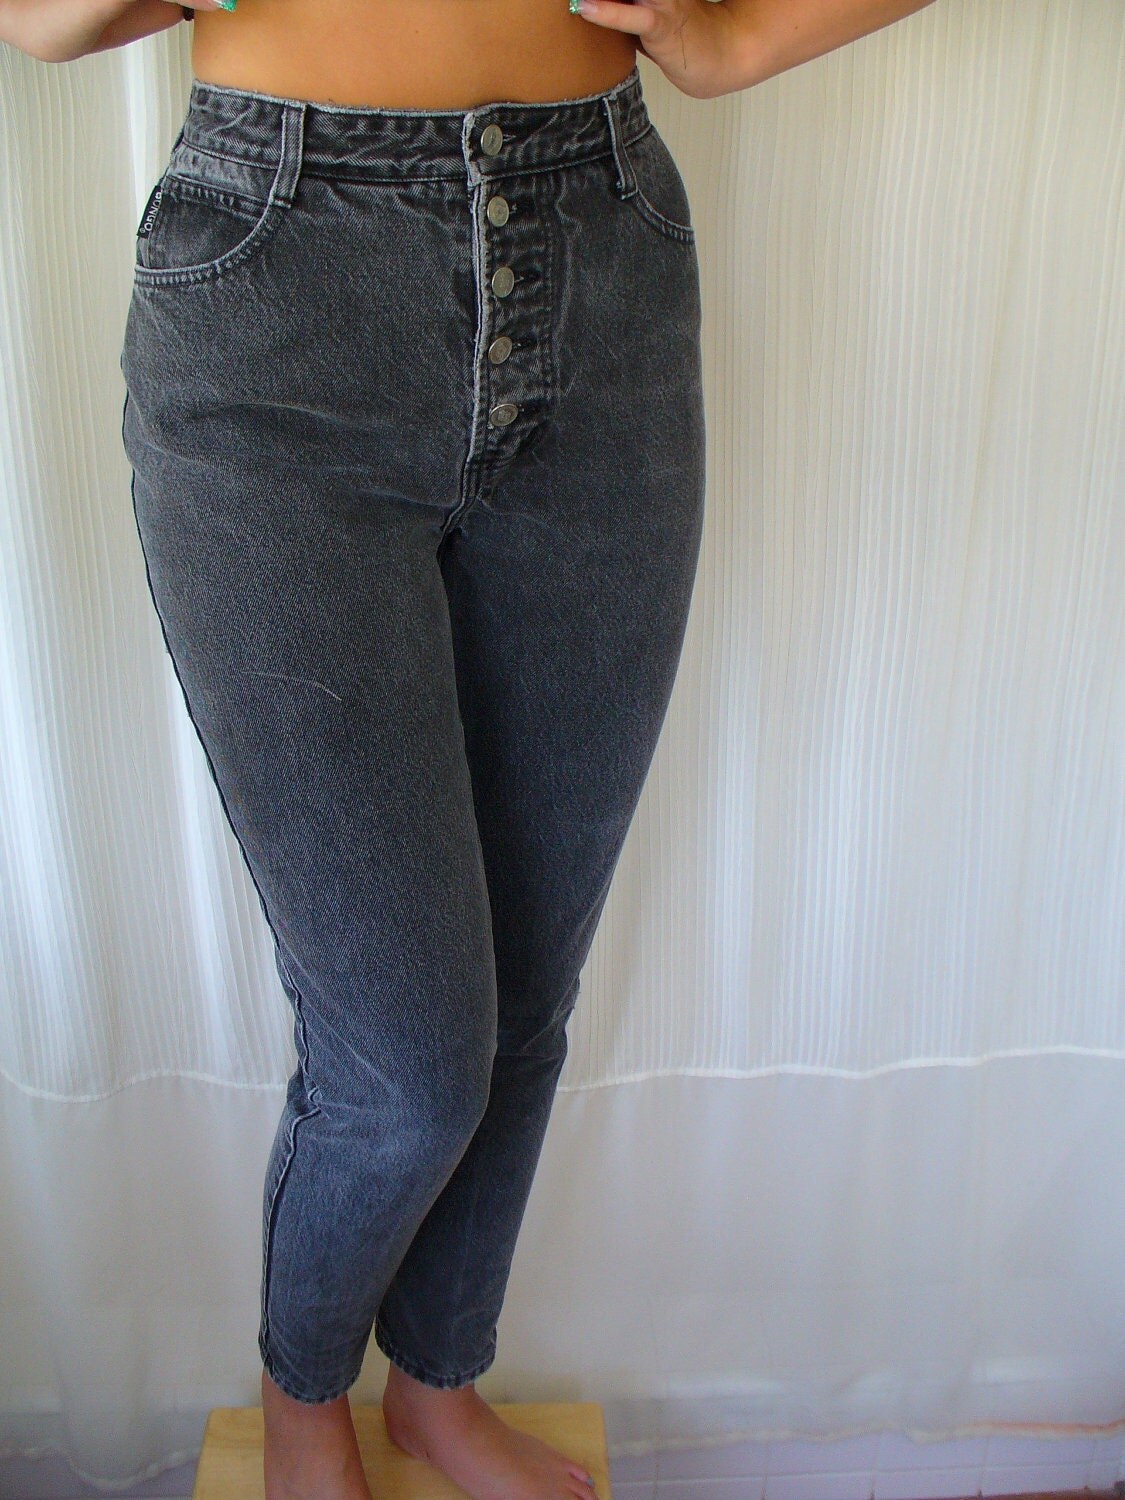 Vintage 70s 80s Bongo Jeans Faded Black High by vintageriches